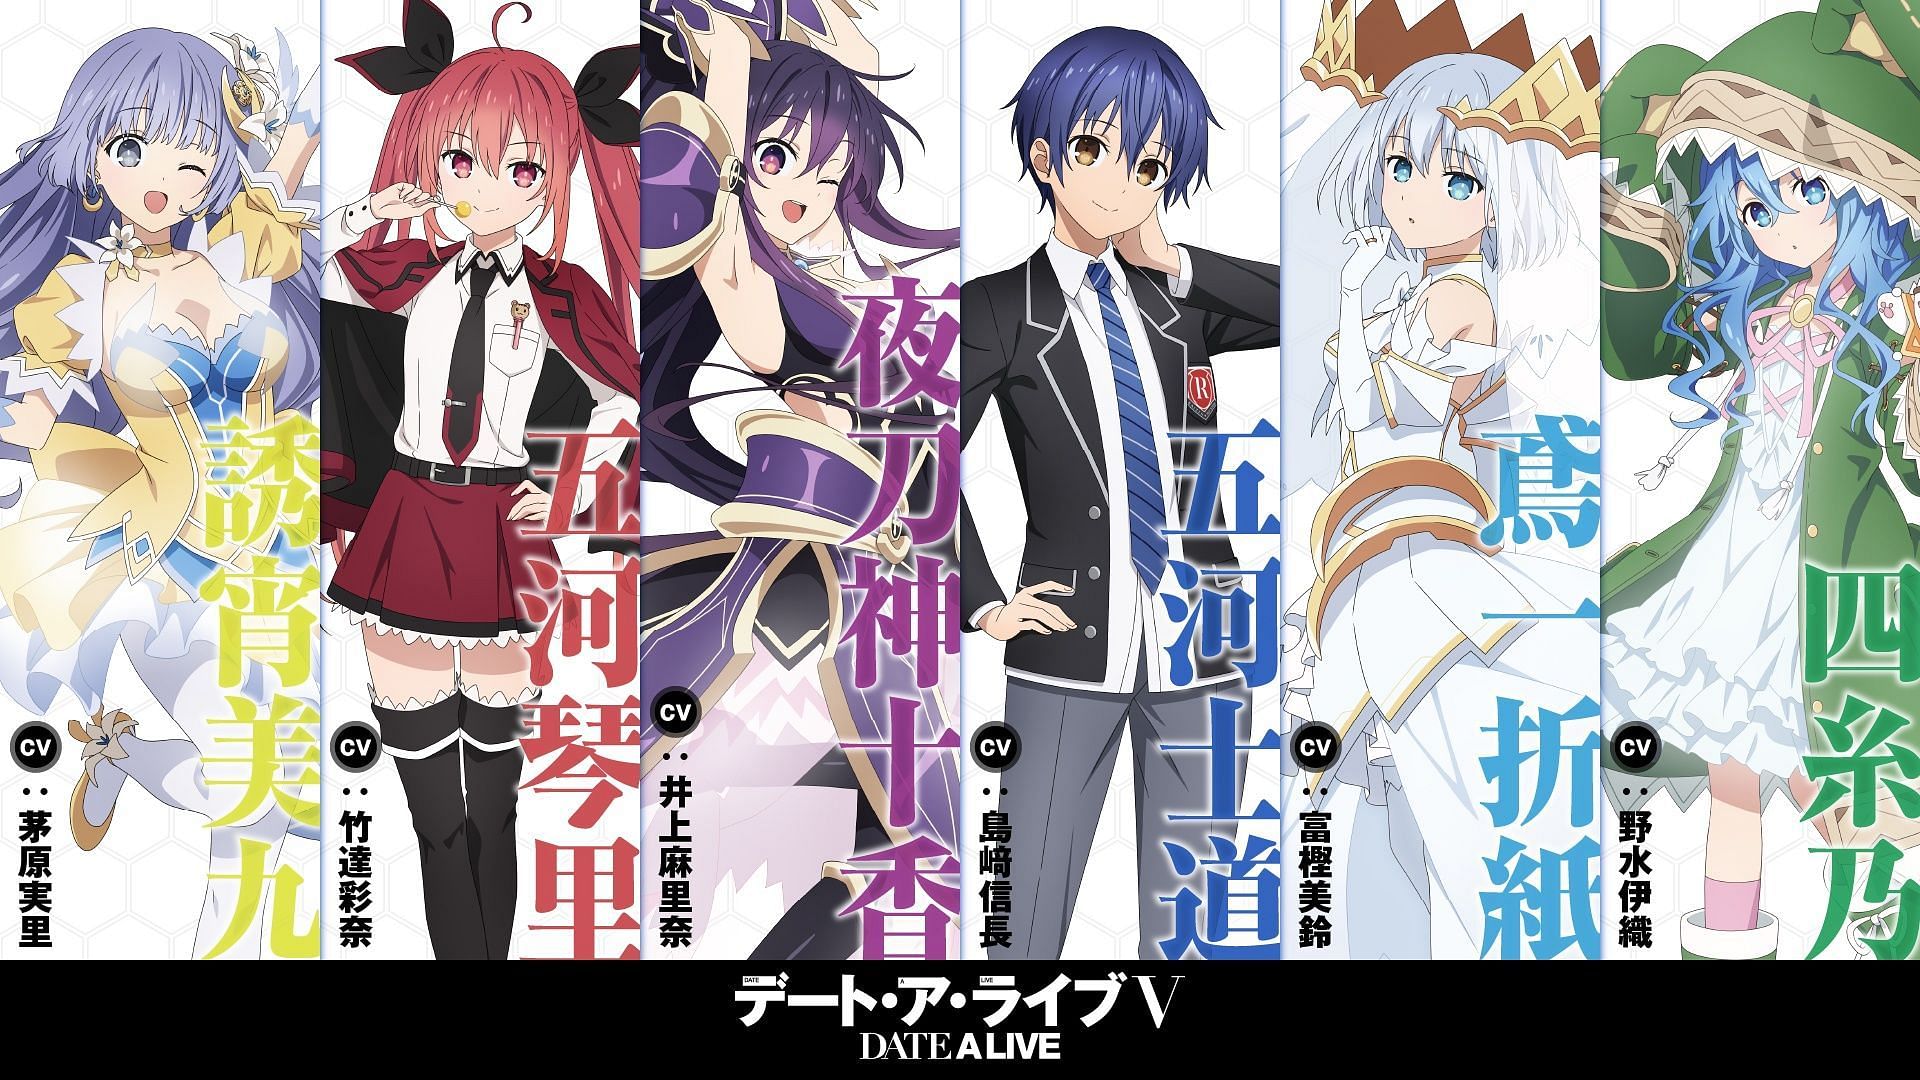 Anime Time - NEWS: Date a Live Season 5 New information Coming on April 5,  2023!! Details